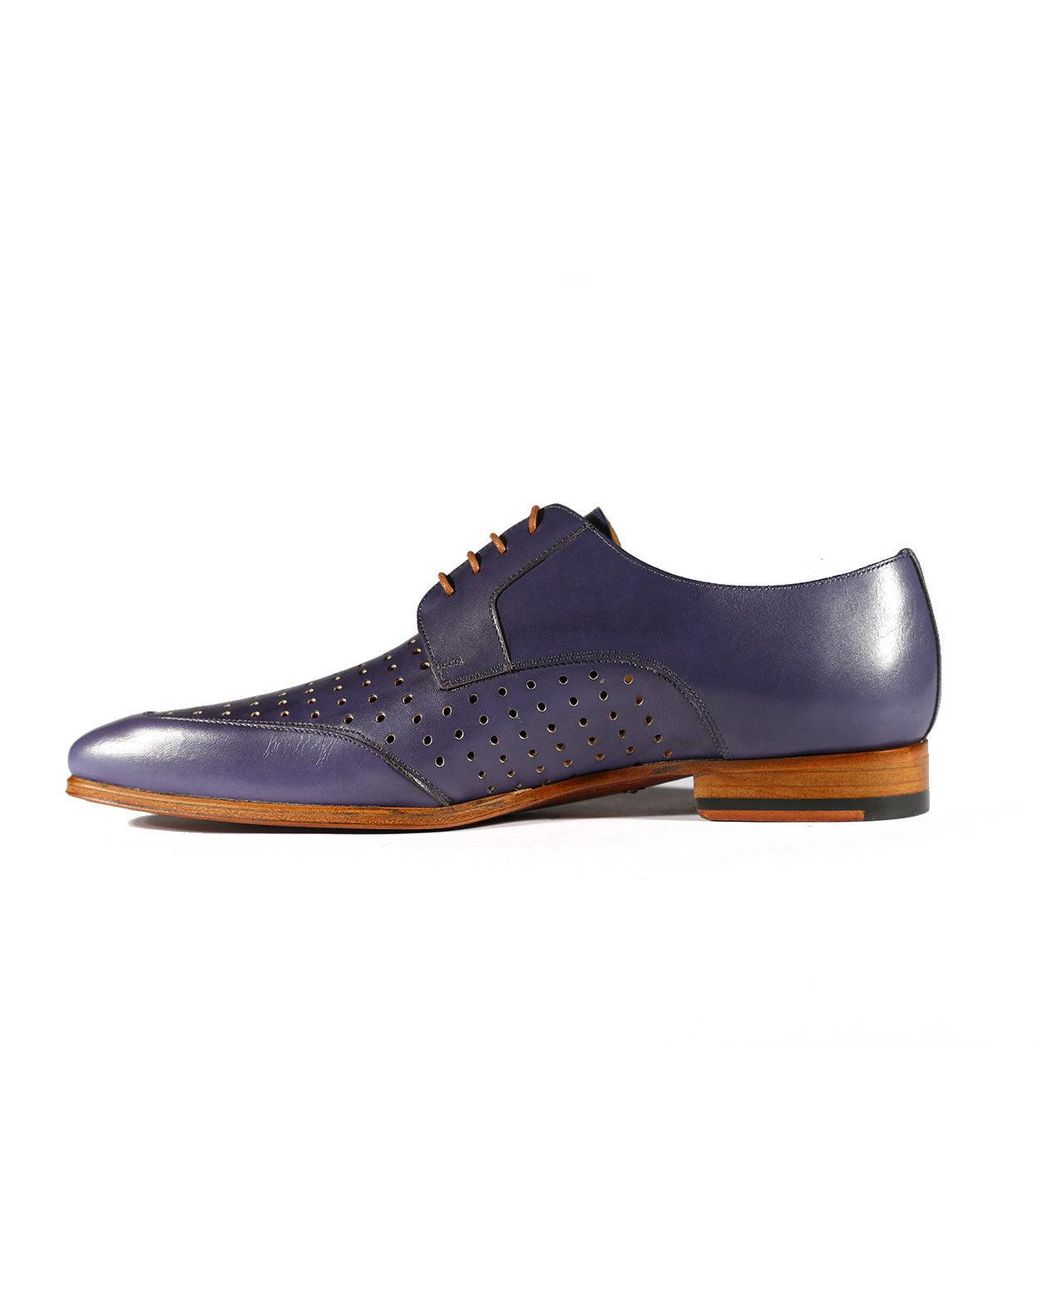 Mezlan S20273 Shoes Perforated Calf-skin Leather Opanka Derby Oxfords in Blue for Men mzs3472 Mens Shoes Lace-ups Oxford shoes 